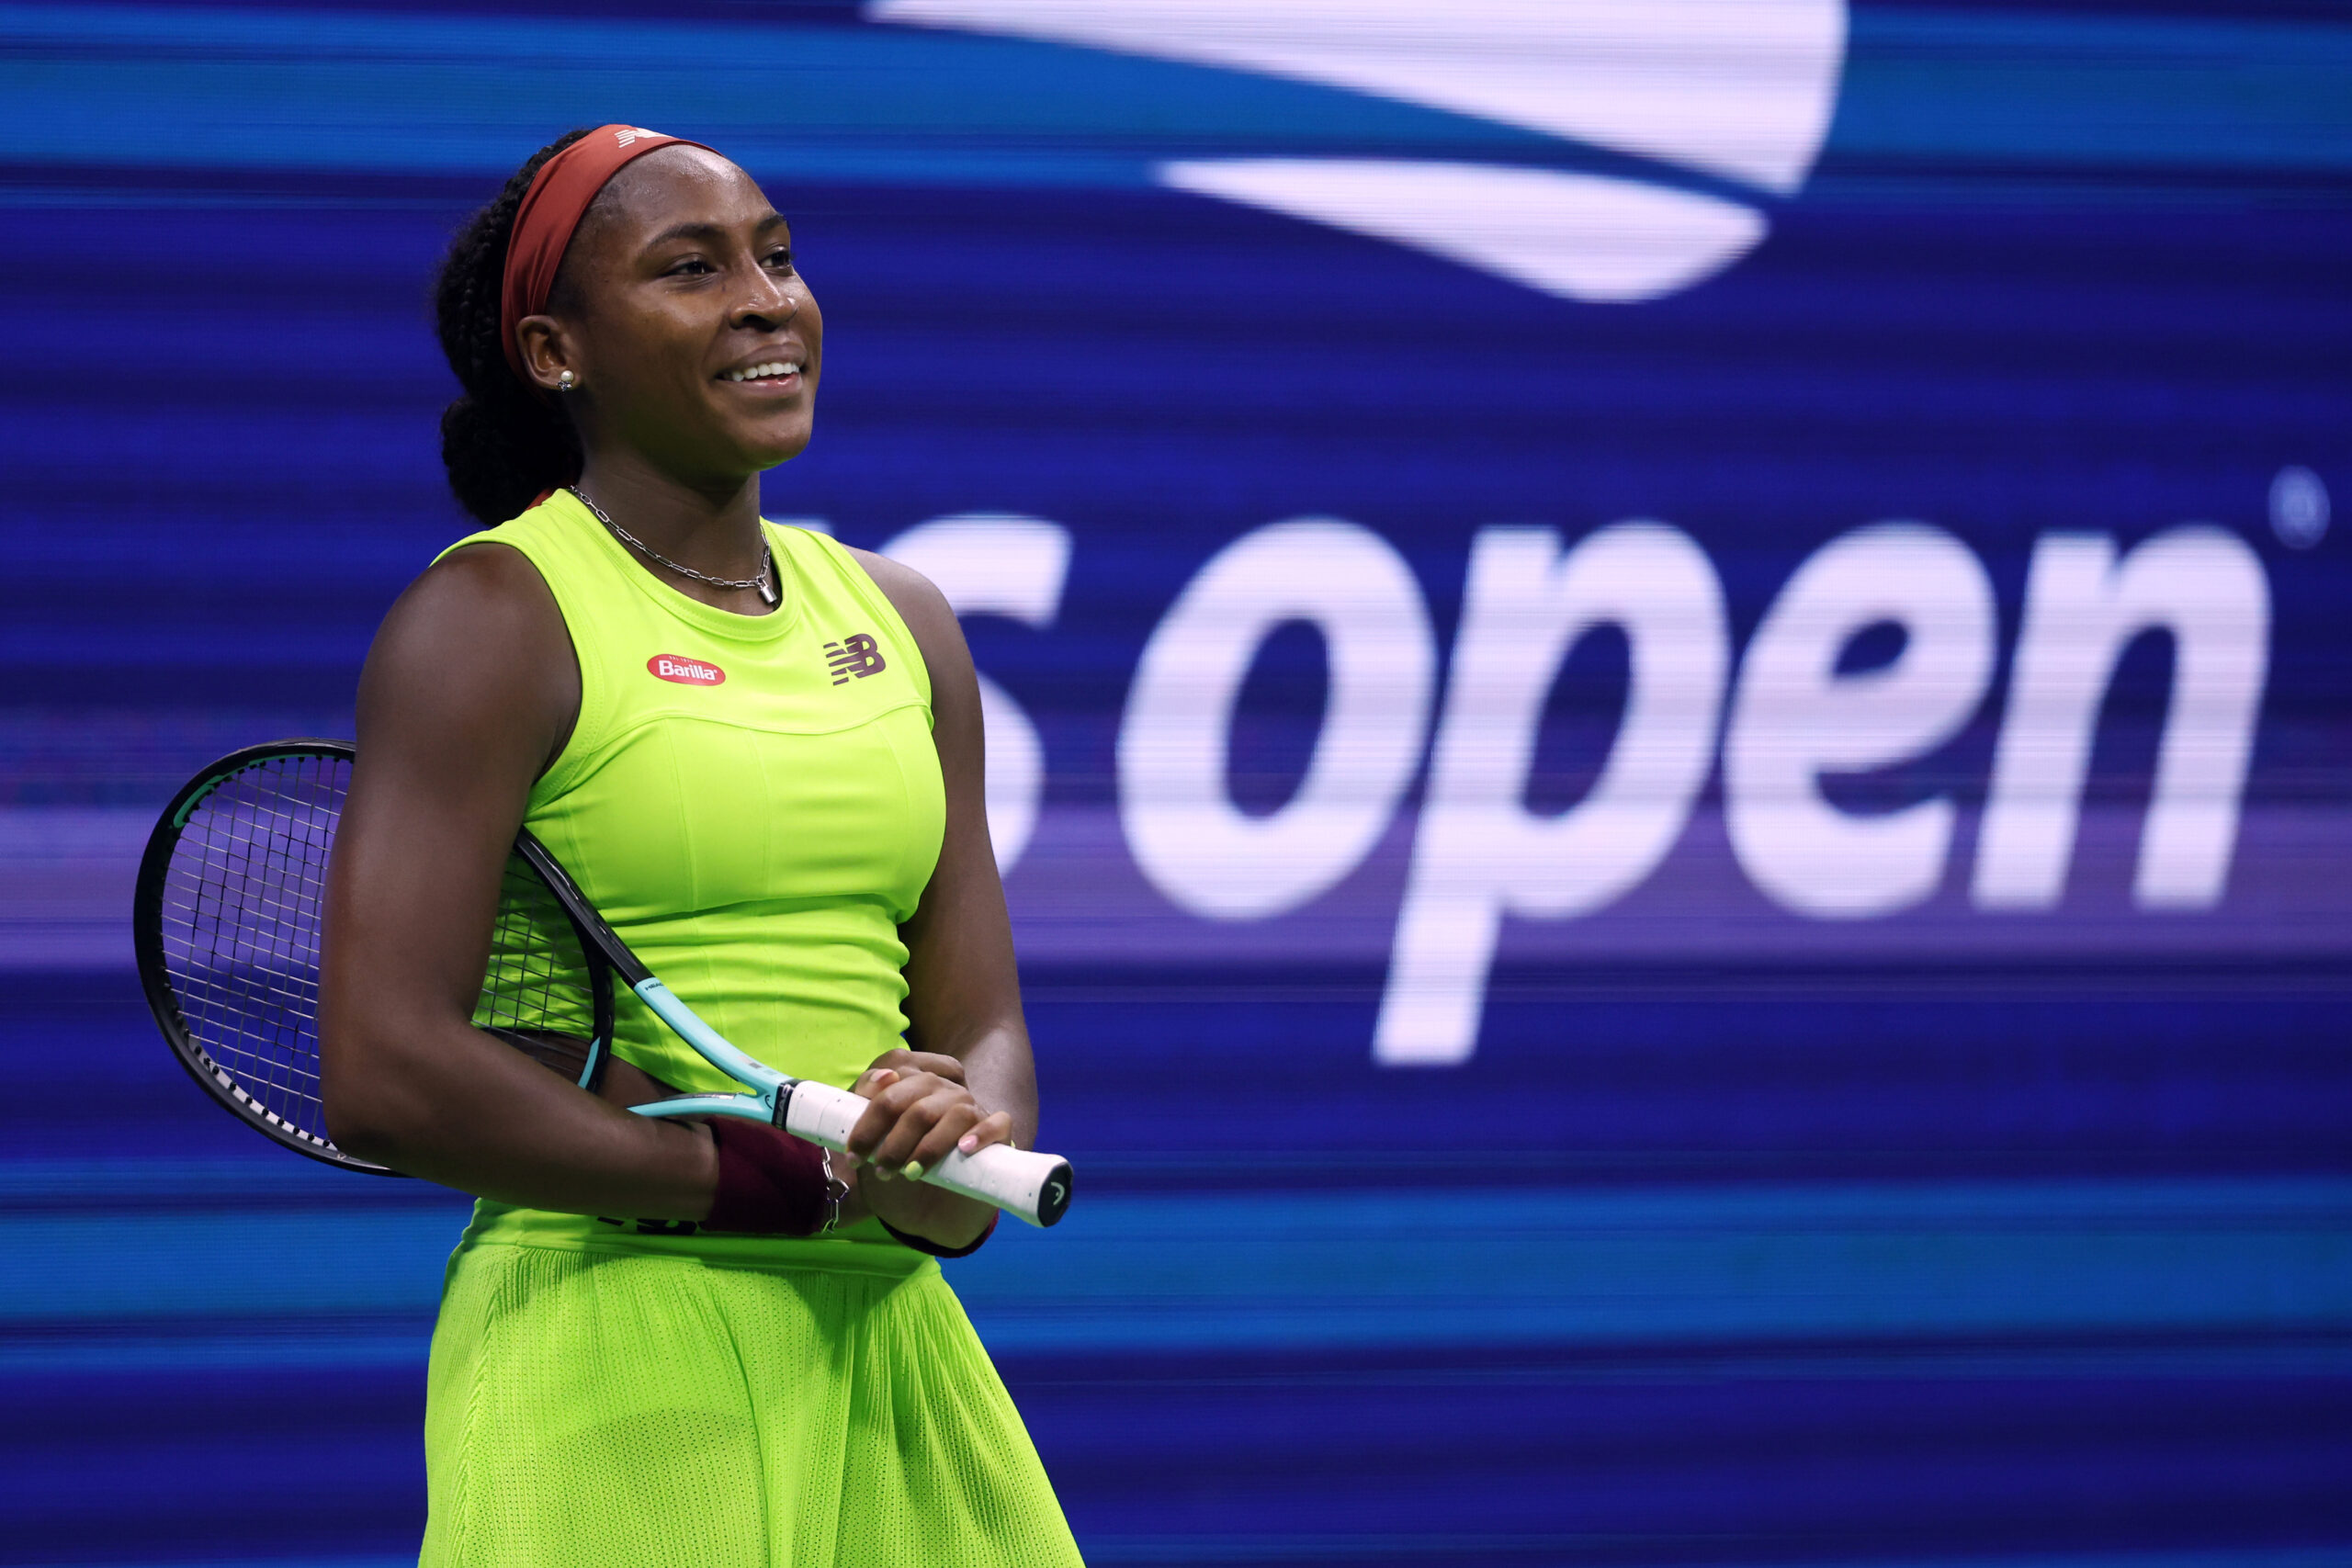 5 Facts About The Newest US Open Champion Coco Gauff